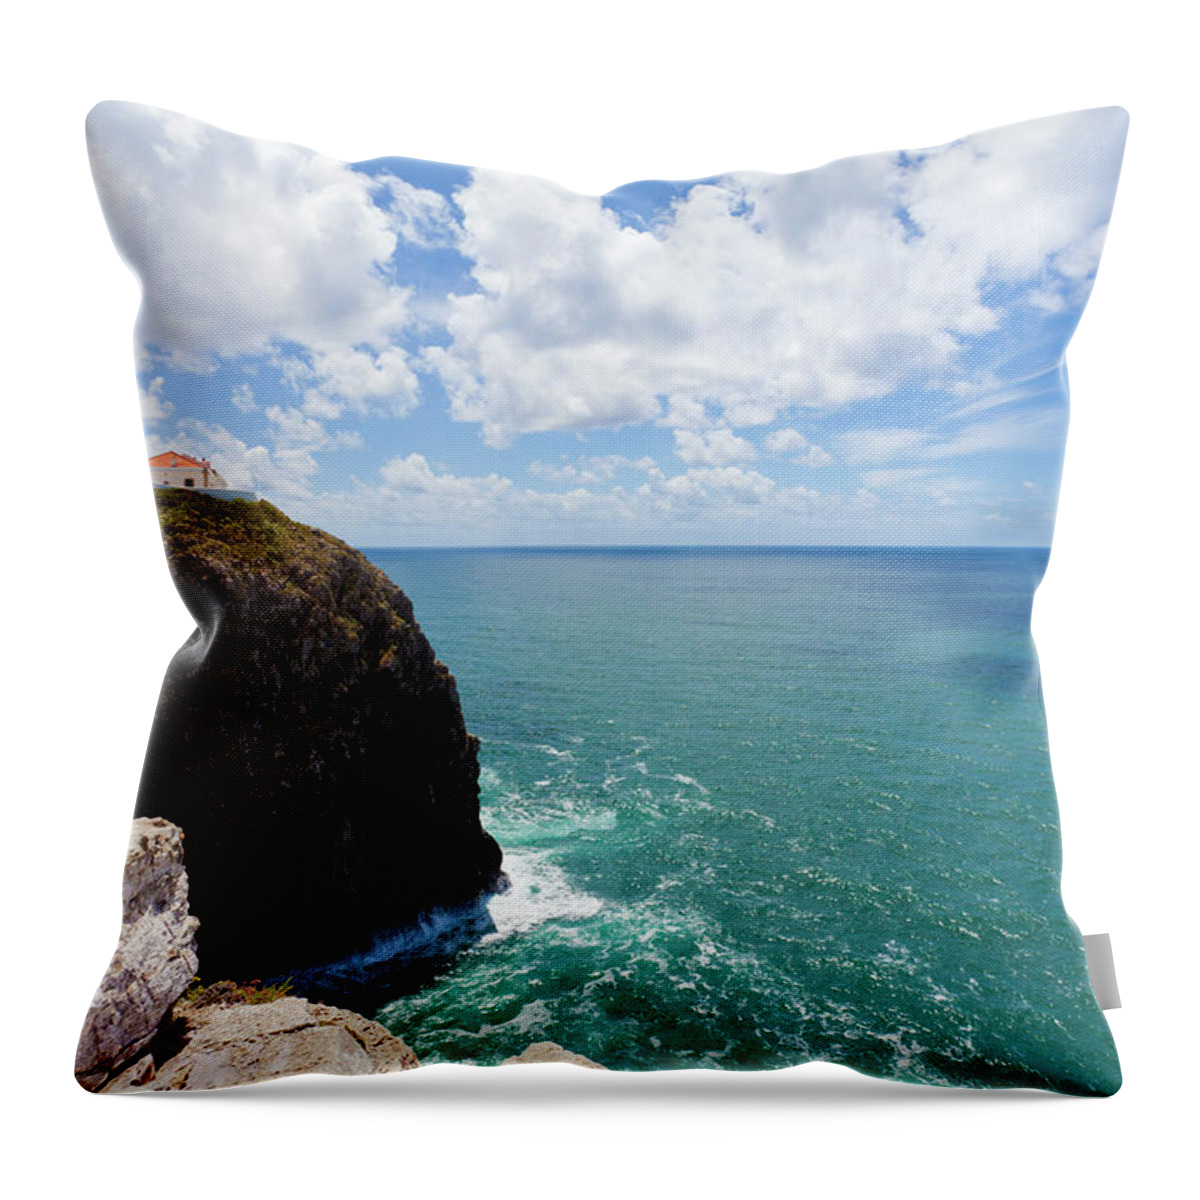 Algarve Throw Pillow featuring the photograph Cabo Sao Vicente Lighthouse, Sagres by Werner Dieterich